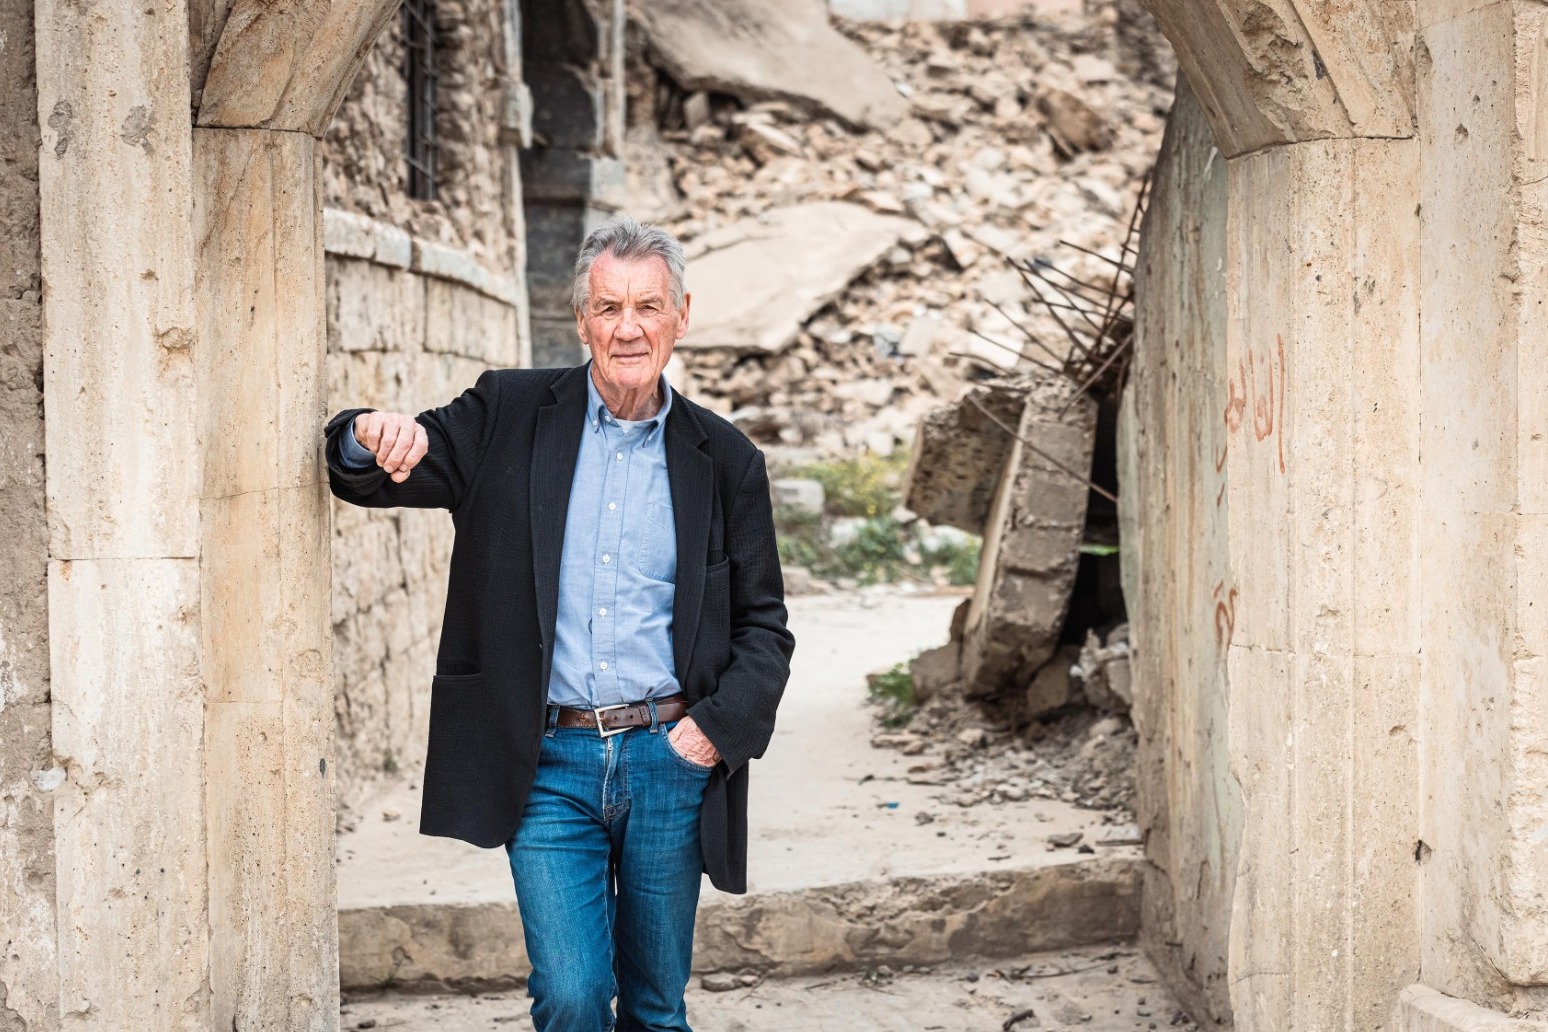 Sir Michael Palin to travel across Iraq in new Channel 5 series 